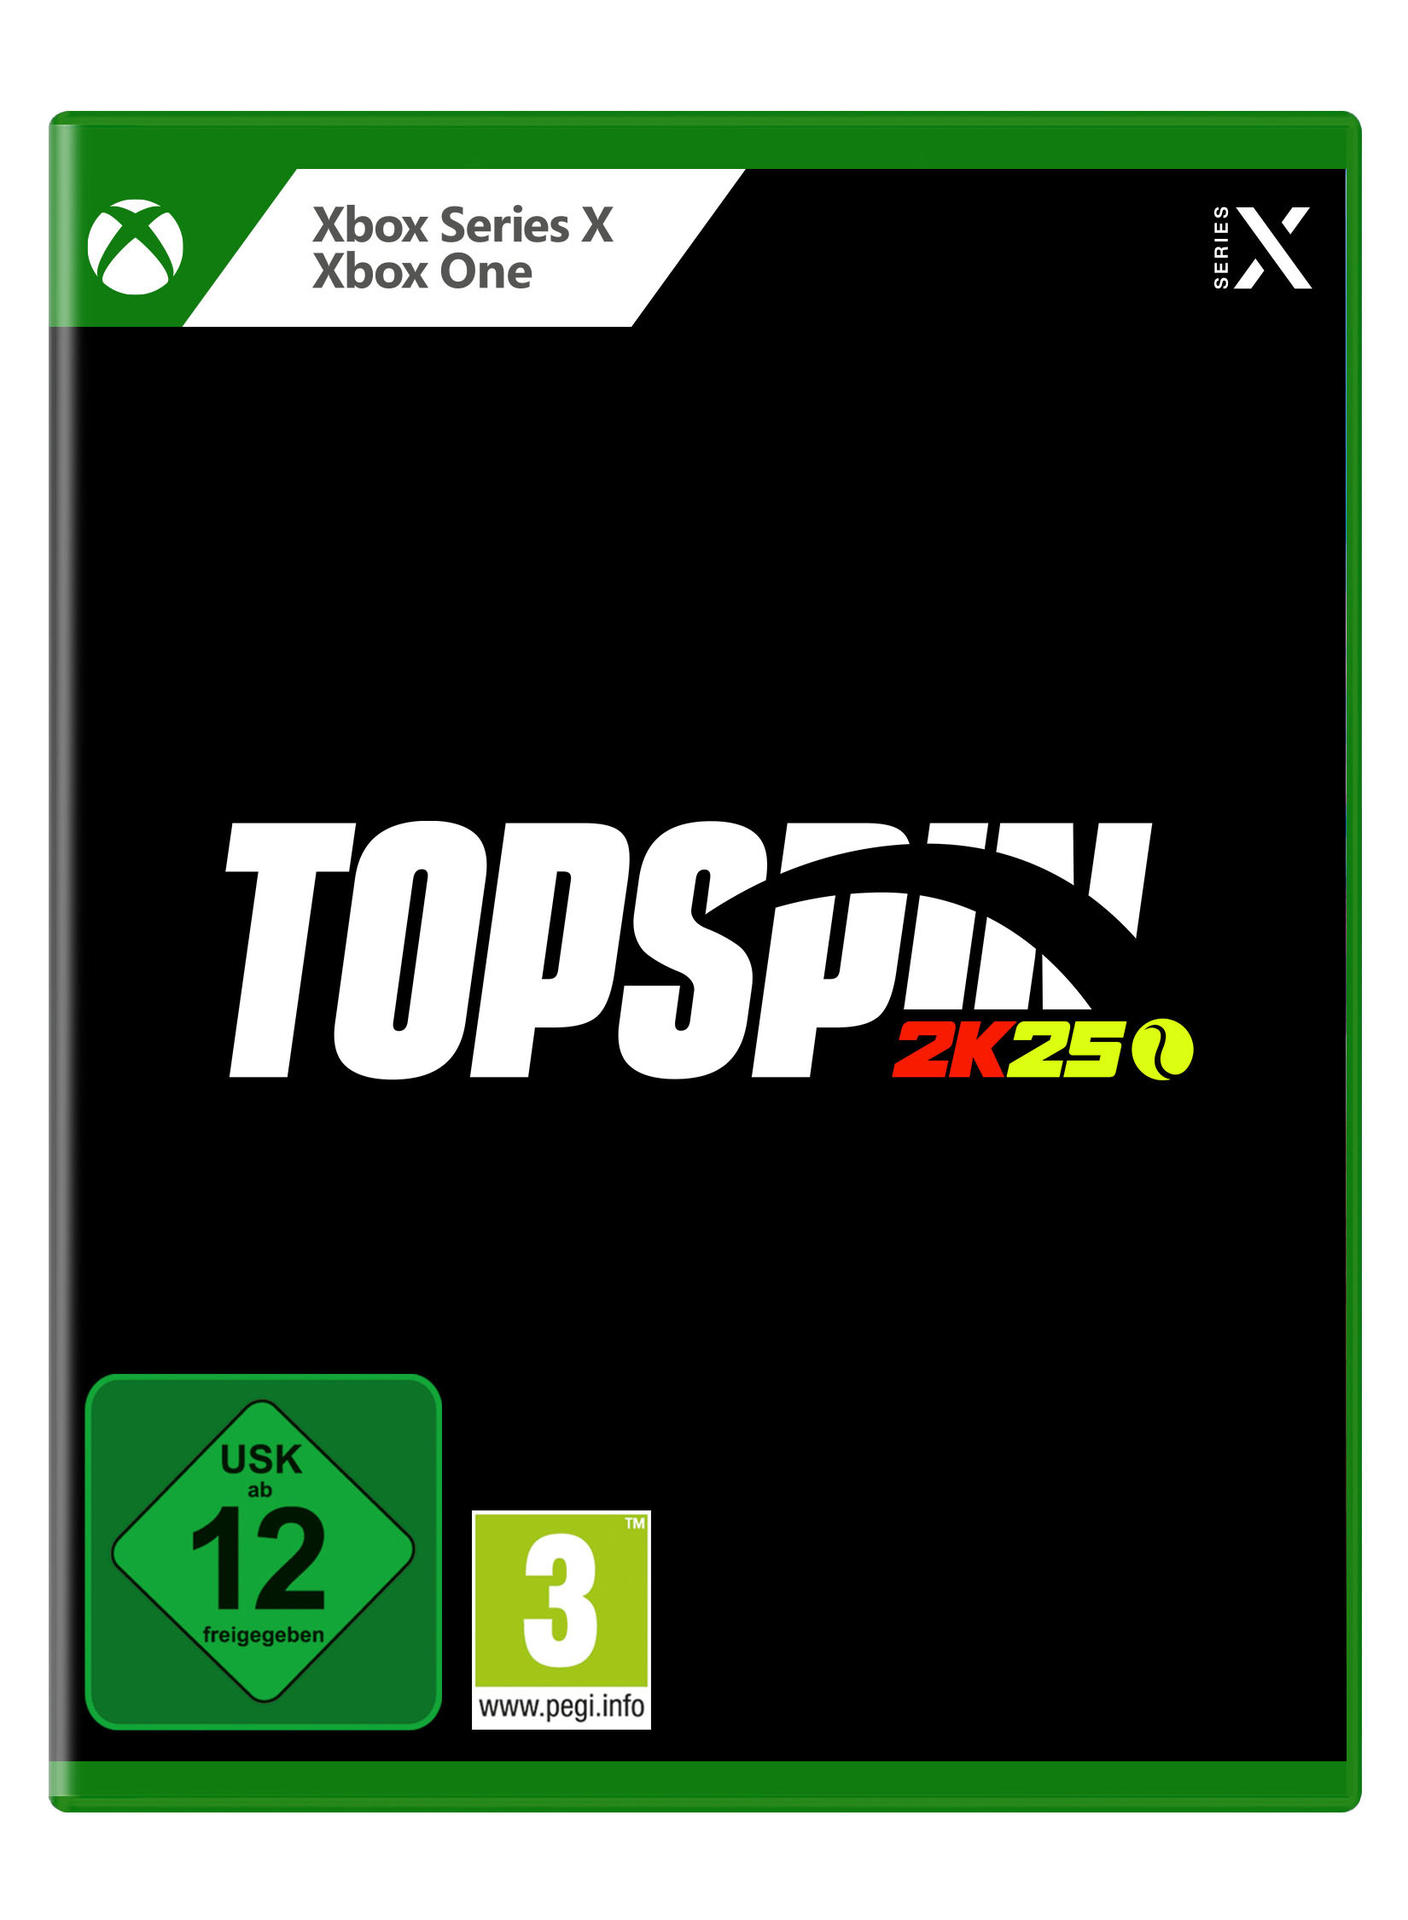 2K25 X] - Series TopSpin [Xbox